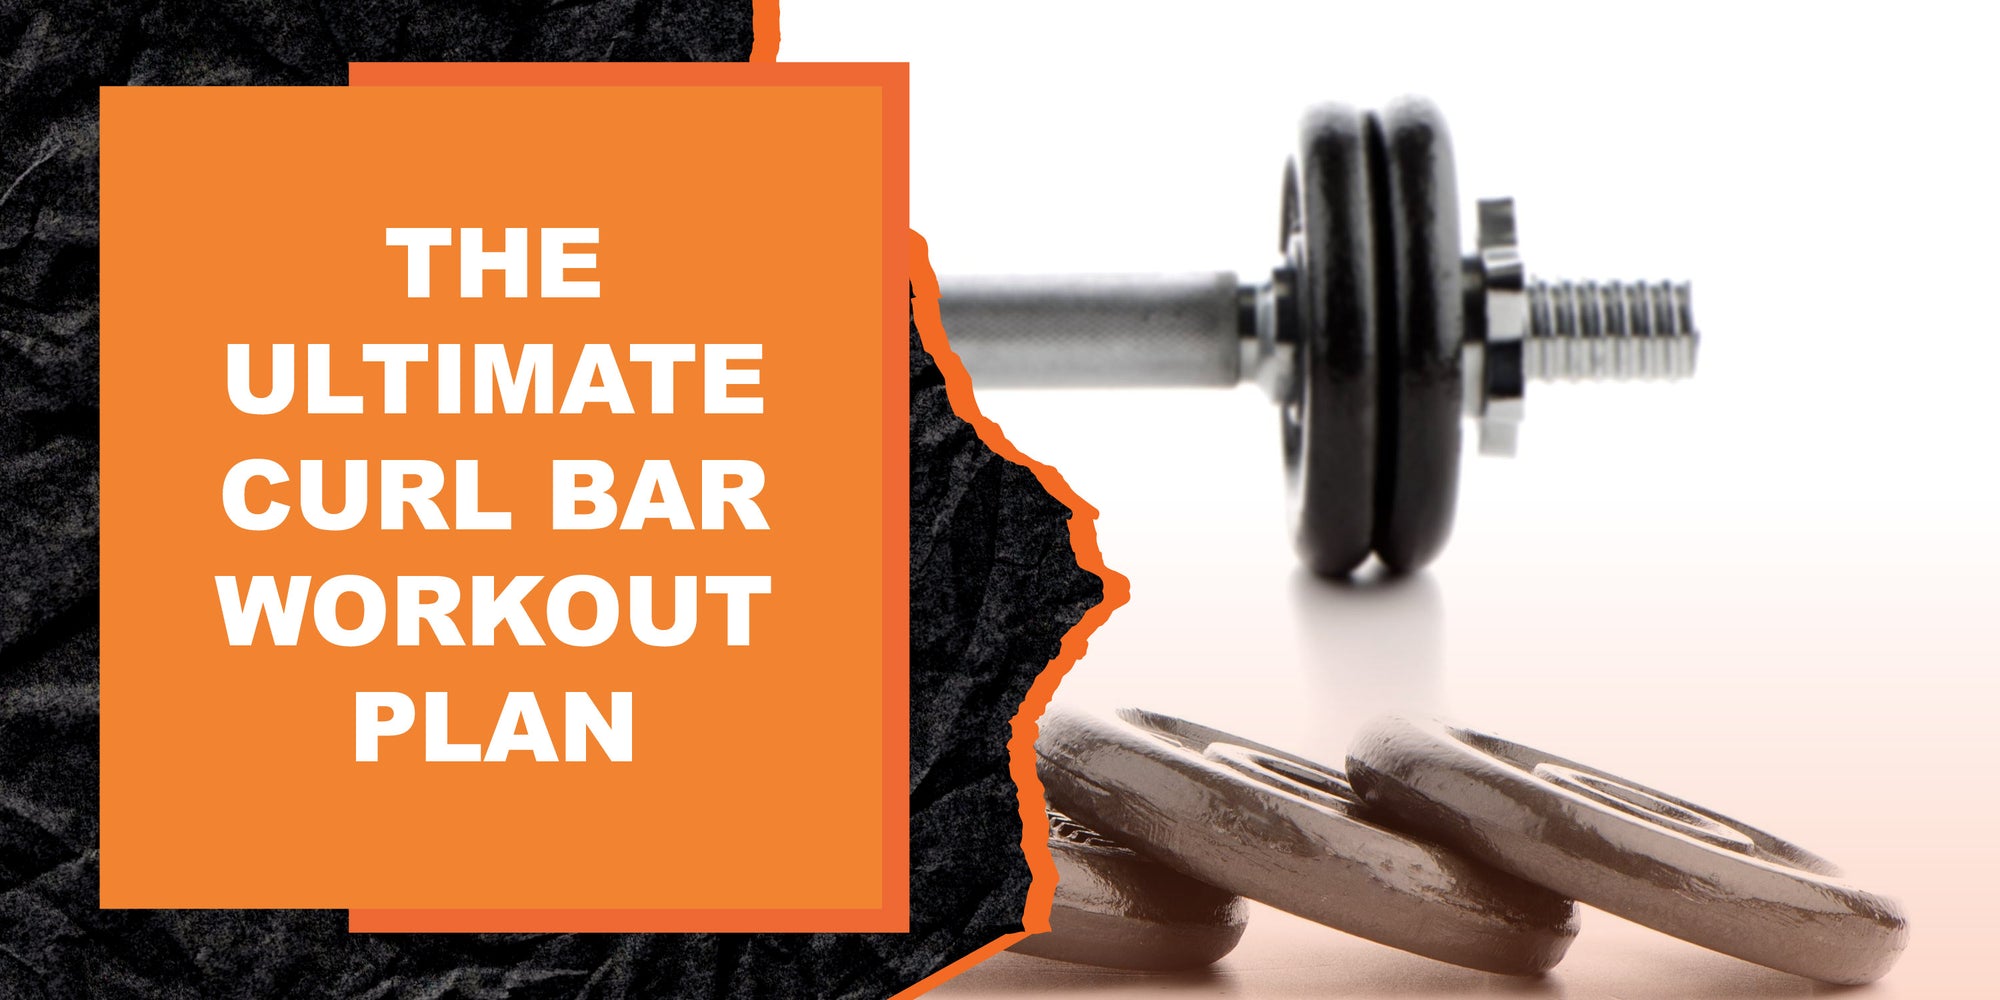 The Ultimate Curl Bar Workout Plan